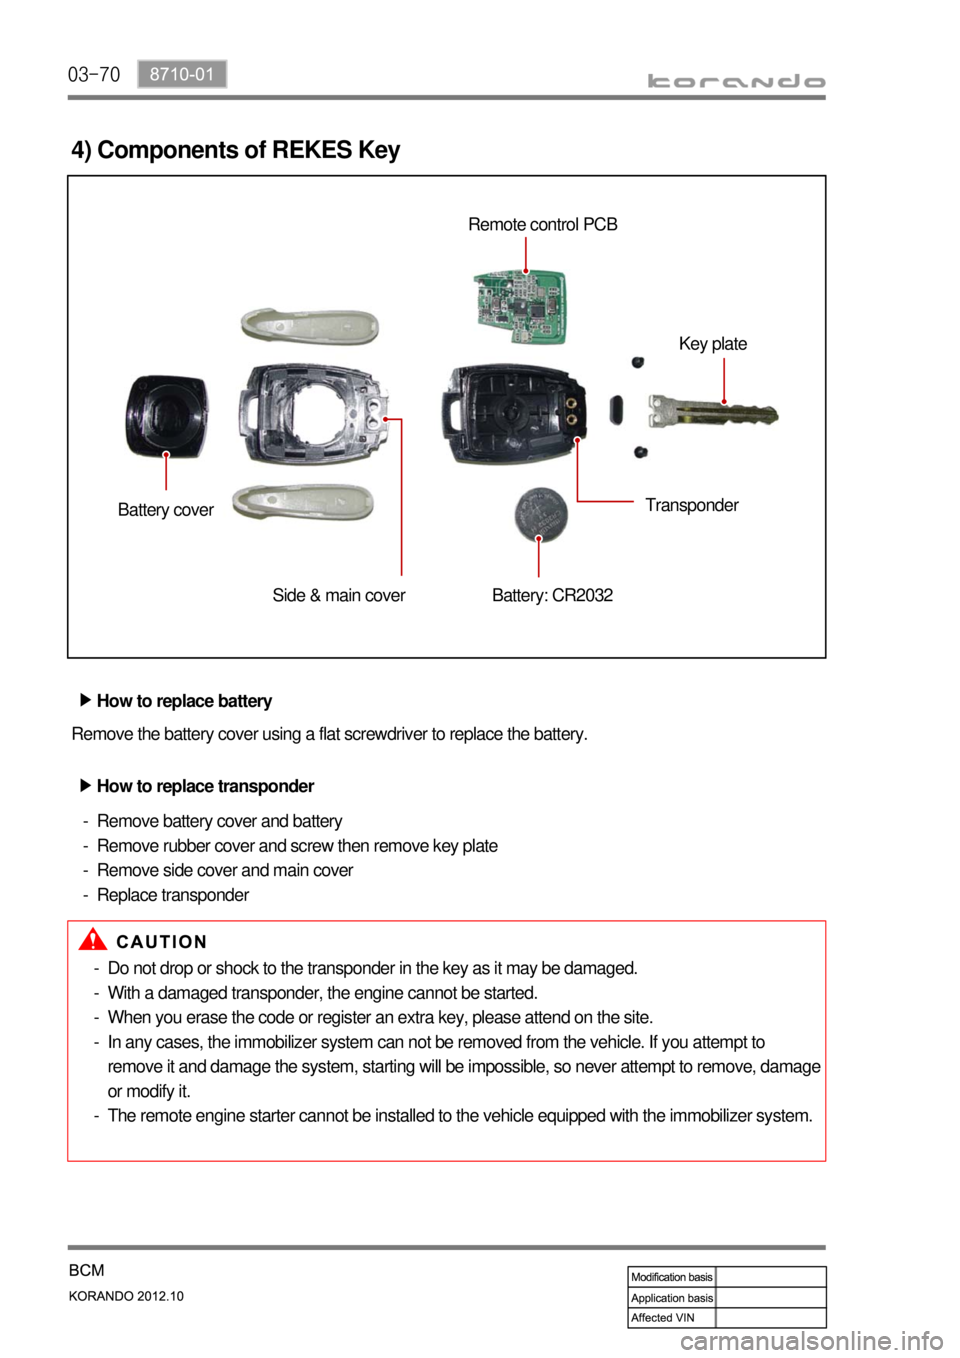 SSANGYONG KORANDO 2012  Service Manual 03-70
4) Components of REKES Key
Battery cover
Side & main cover Battery: CR2032TransponderKey plate Remote control PCB
How to replace battery ▶
Remove the battery cover using a flat screwdriver to 